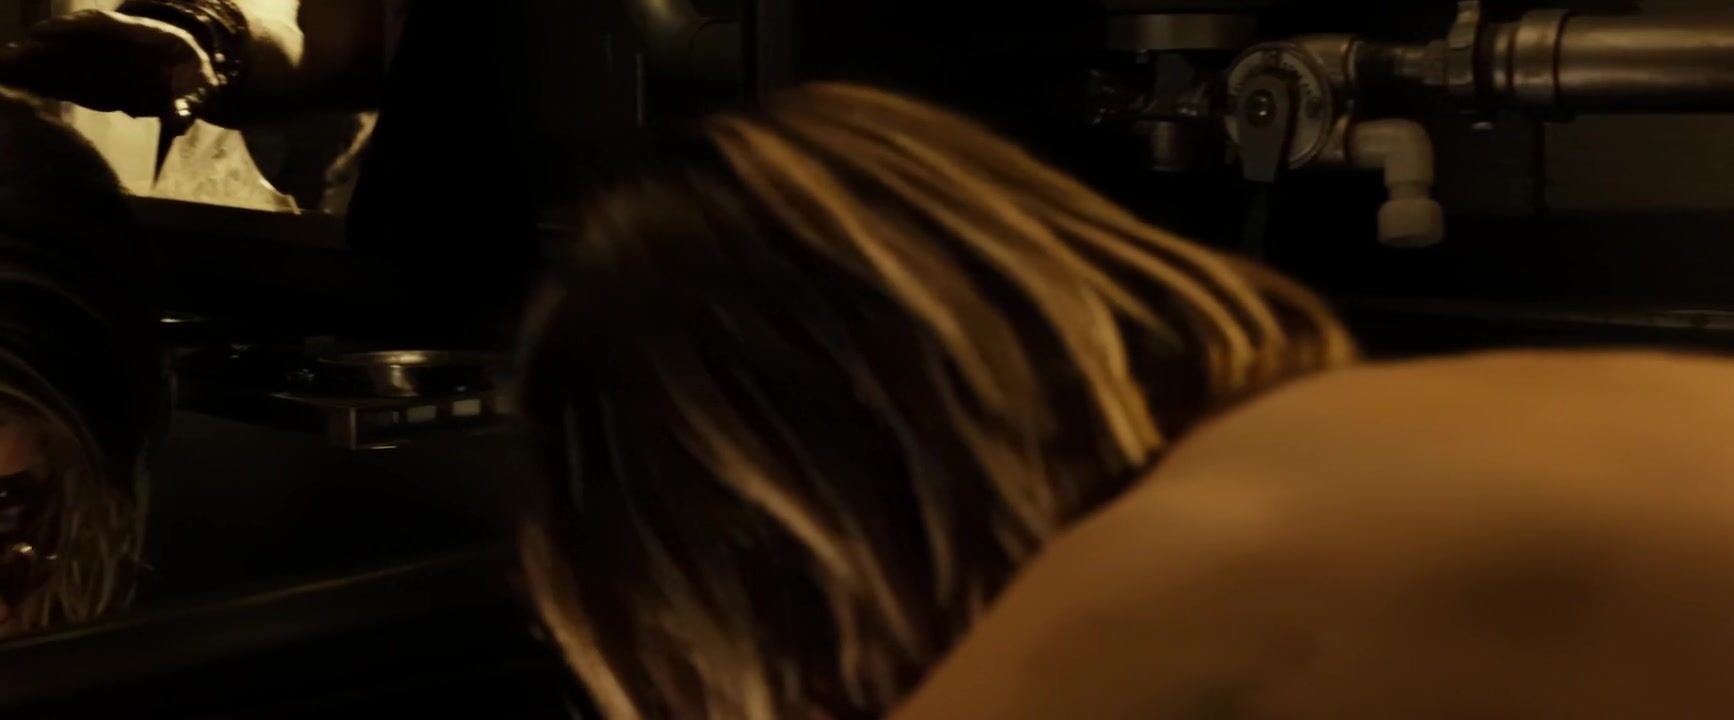 Messy Riddick tells story of Katee Sackhoff who takes clothes off and goes washing body (2013) Dildo Fucking